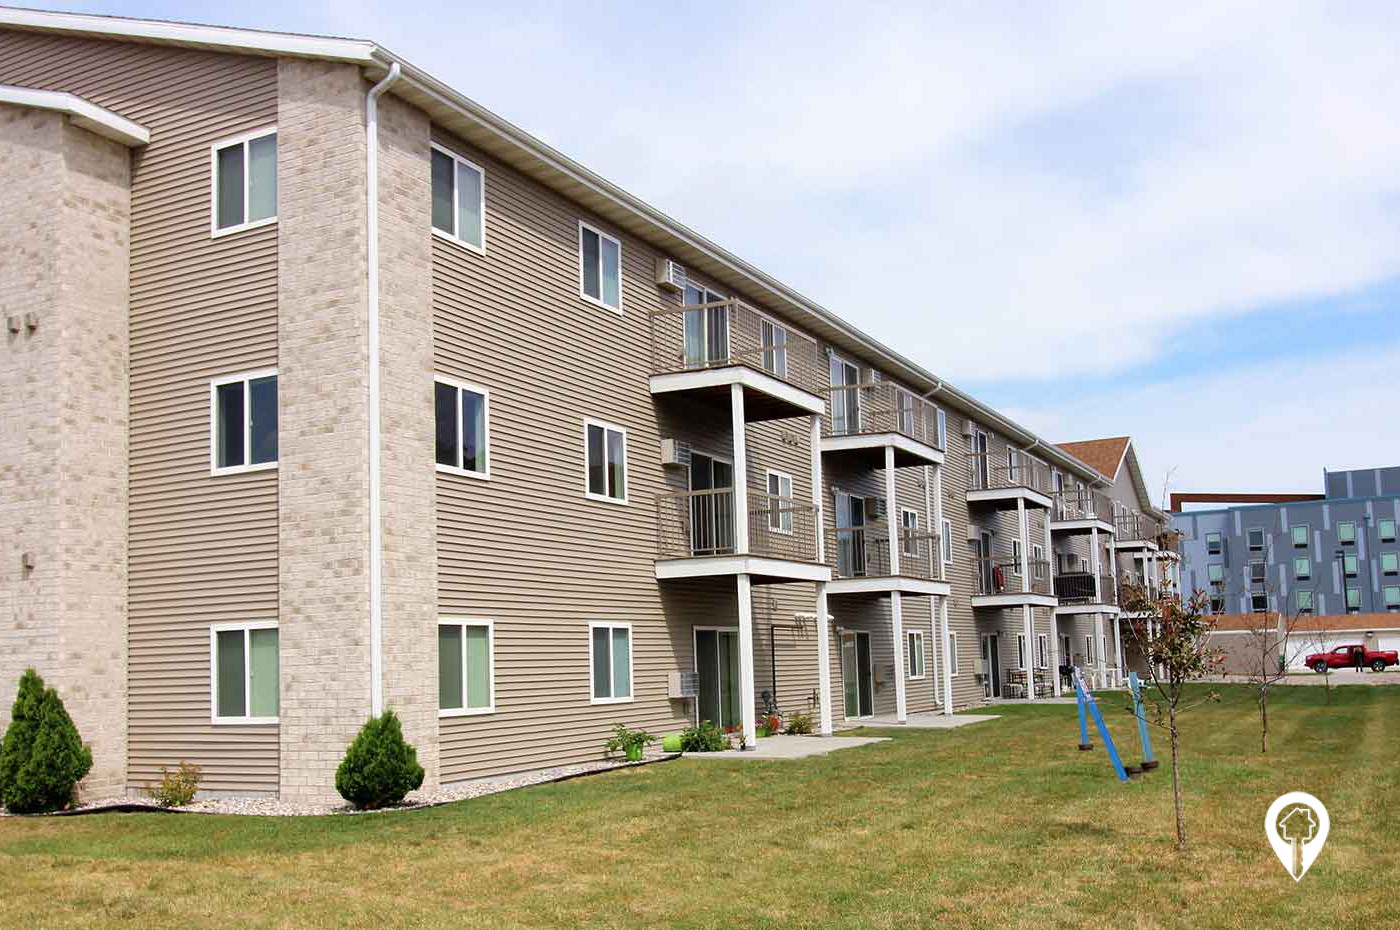 Country Meadows Apartments